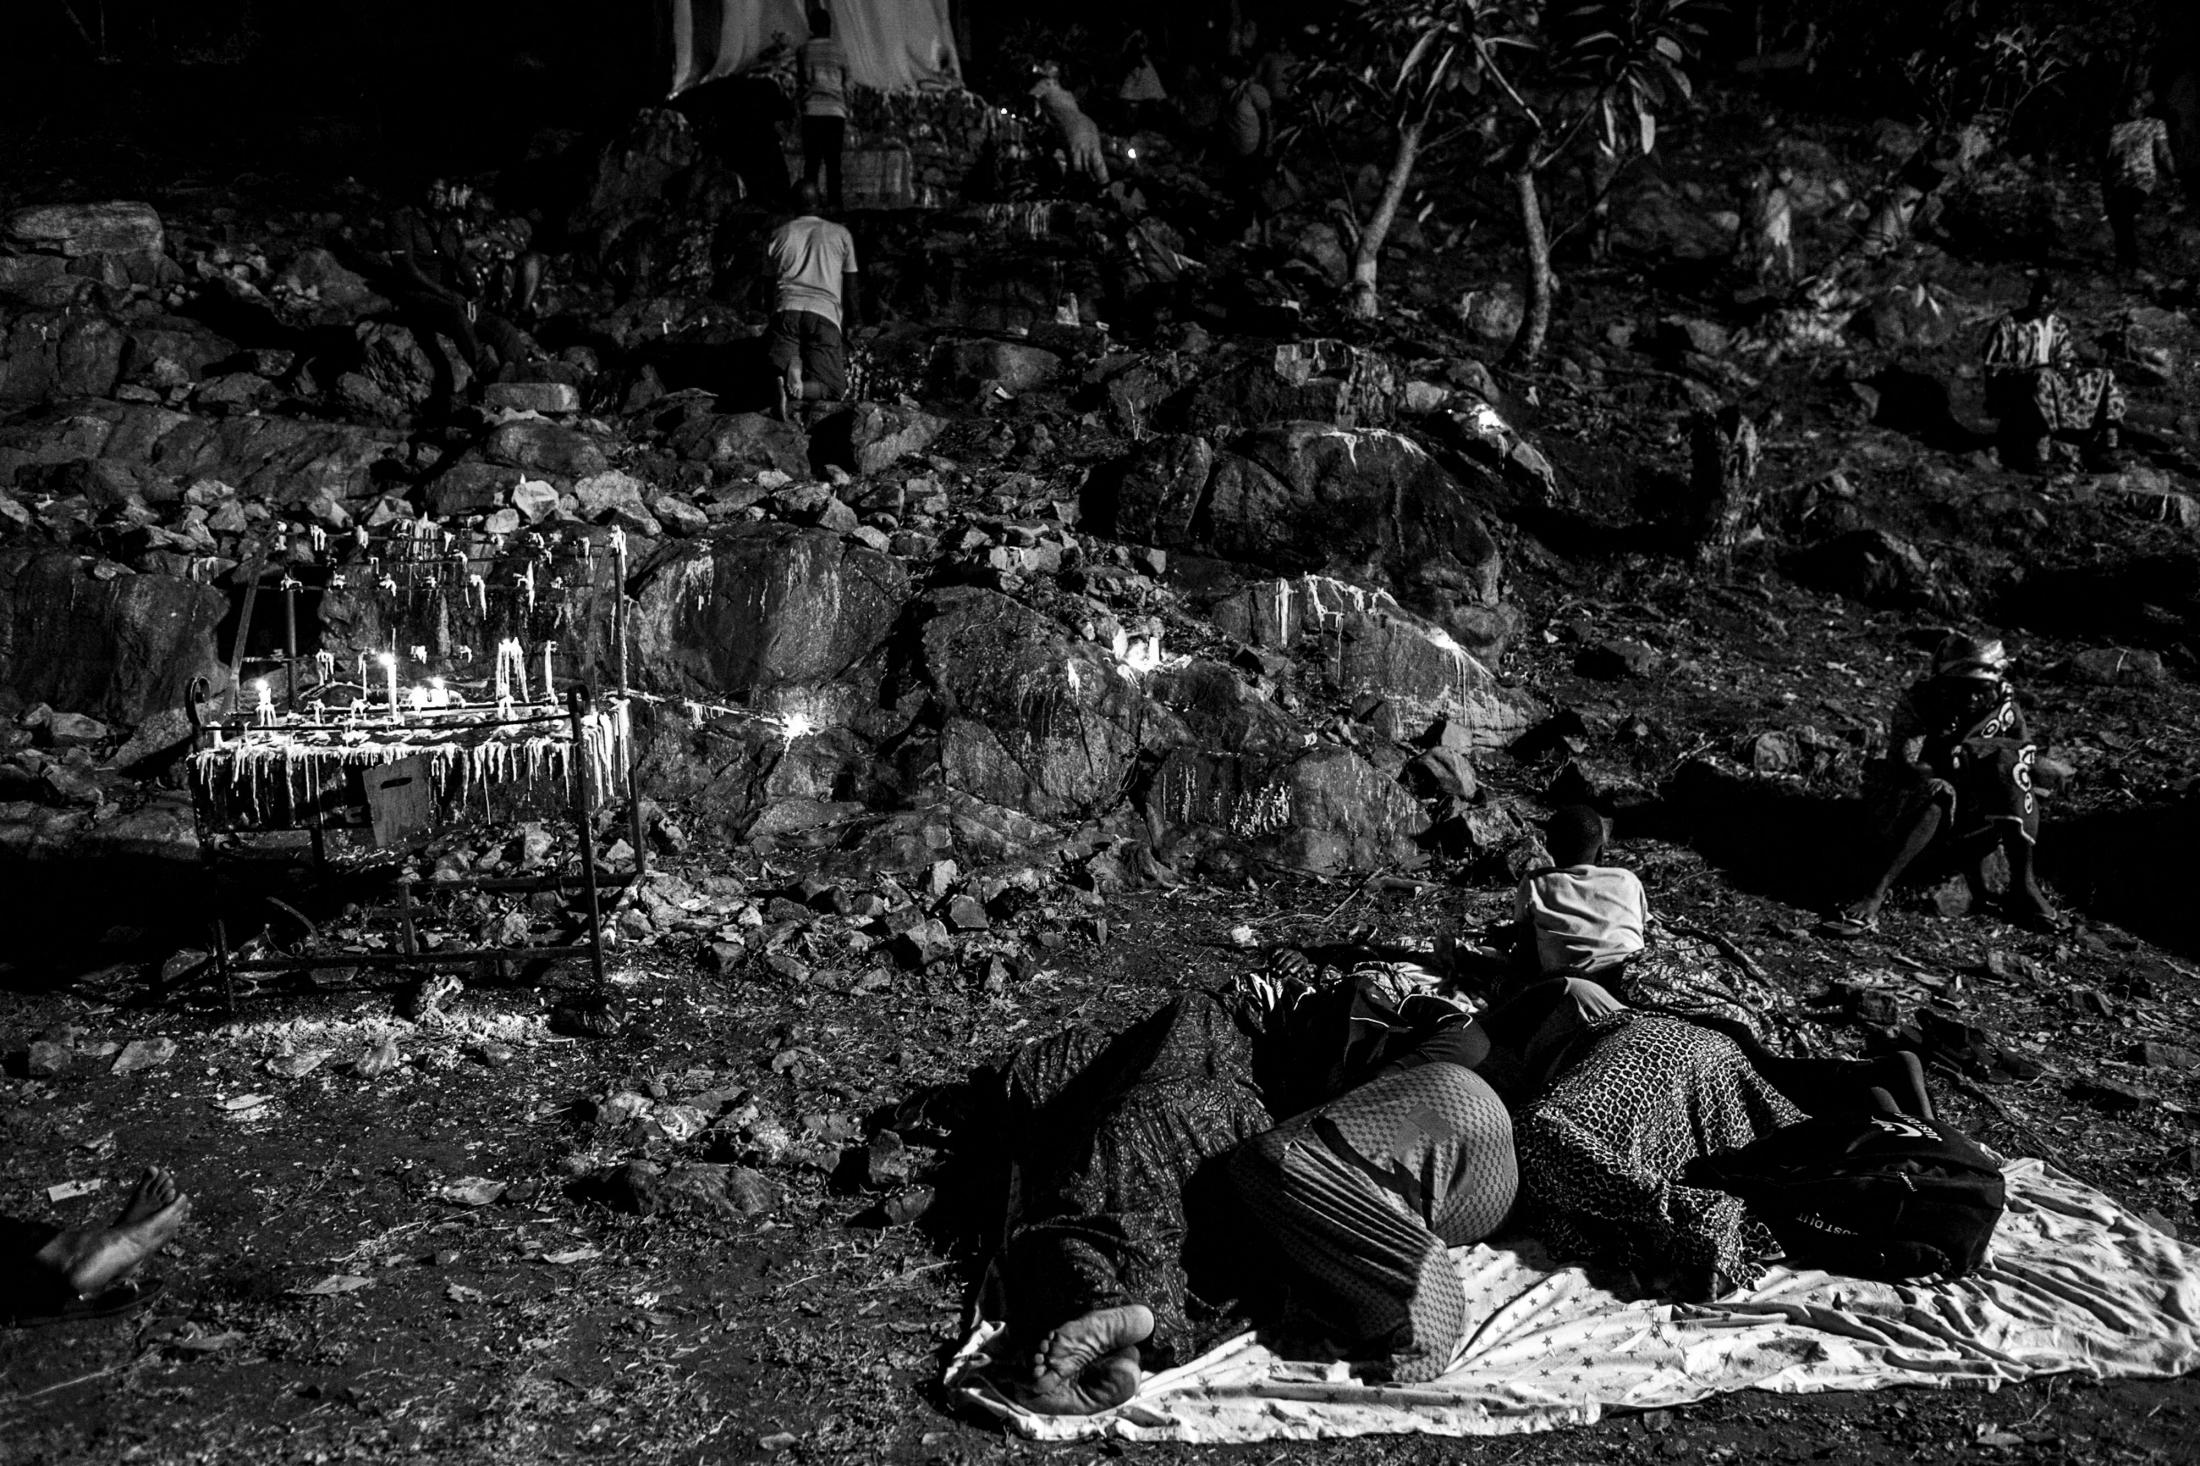 Pilgrims spend the night on the ground at the Our Lady of Lourdes grotto.